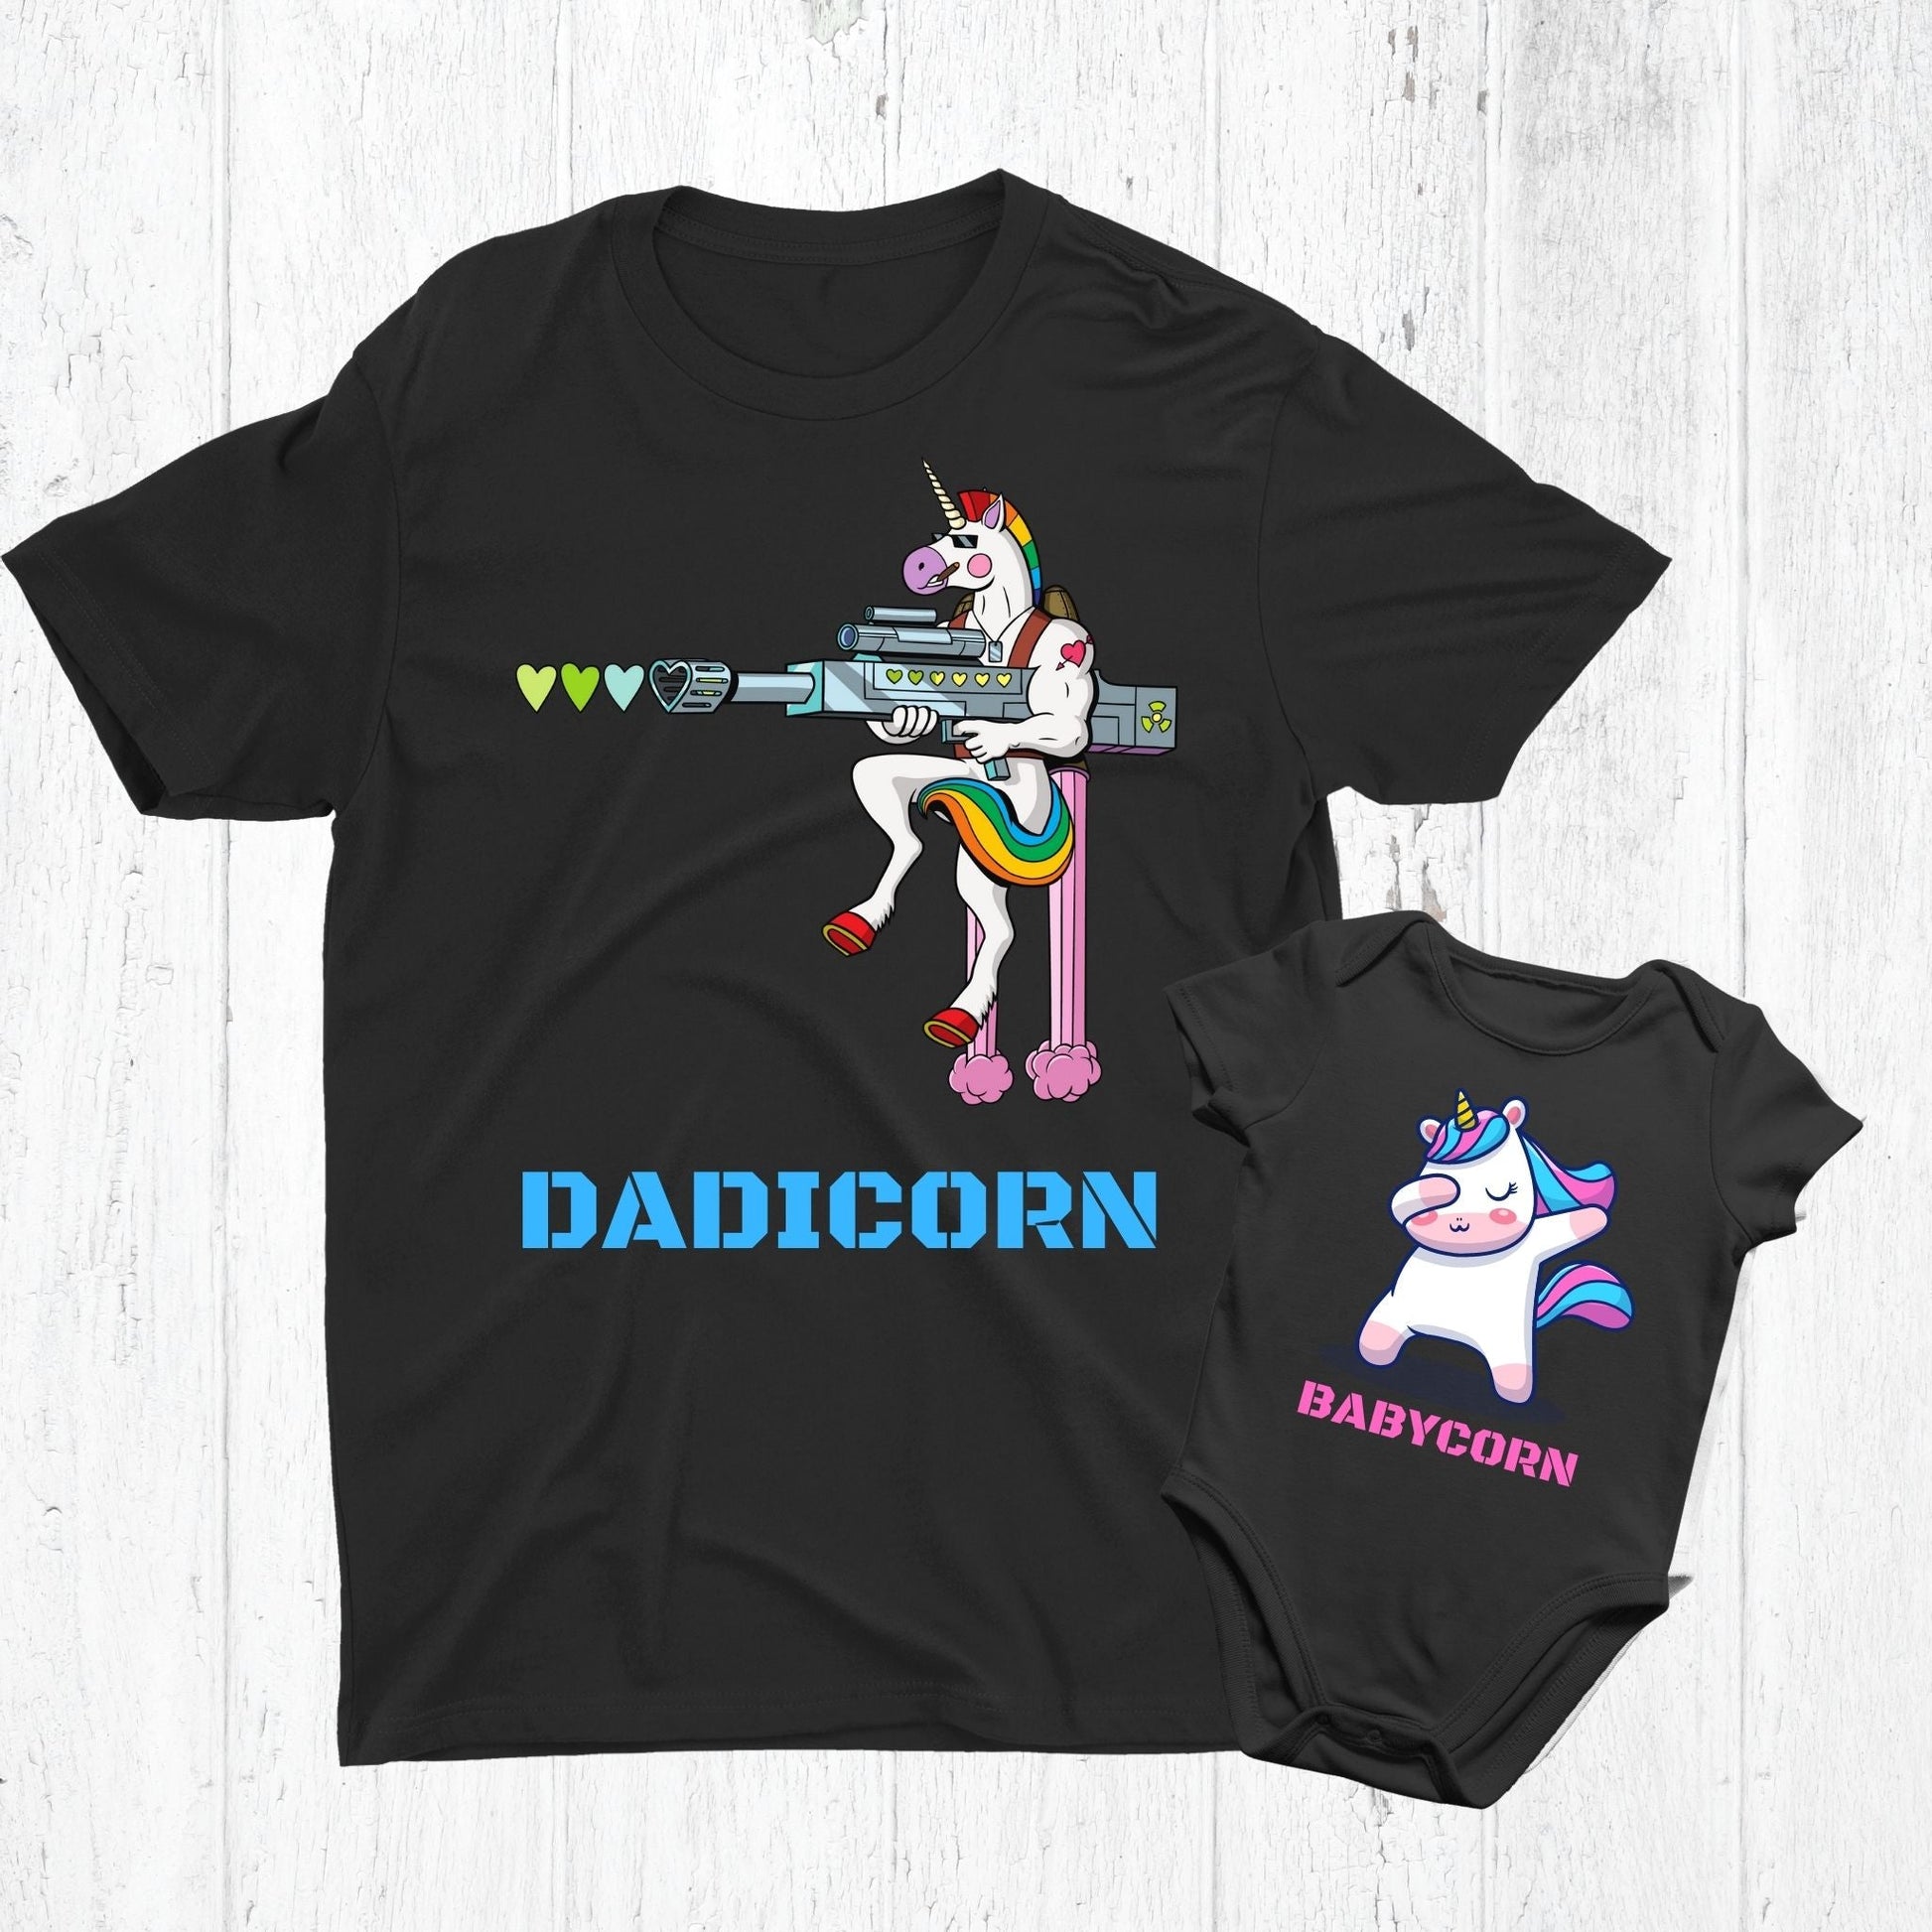 Unicorn Dad | Father & Son Matching T-shirts | Father's Day Gift - Three2Tango Tee's